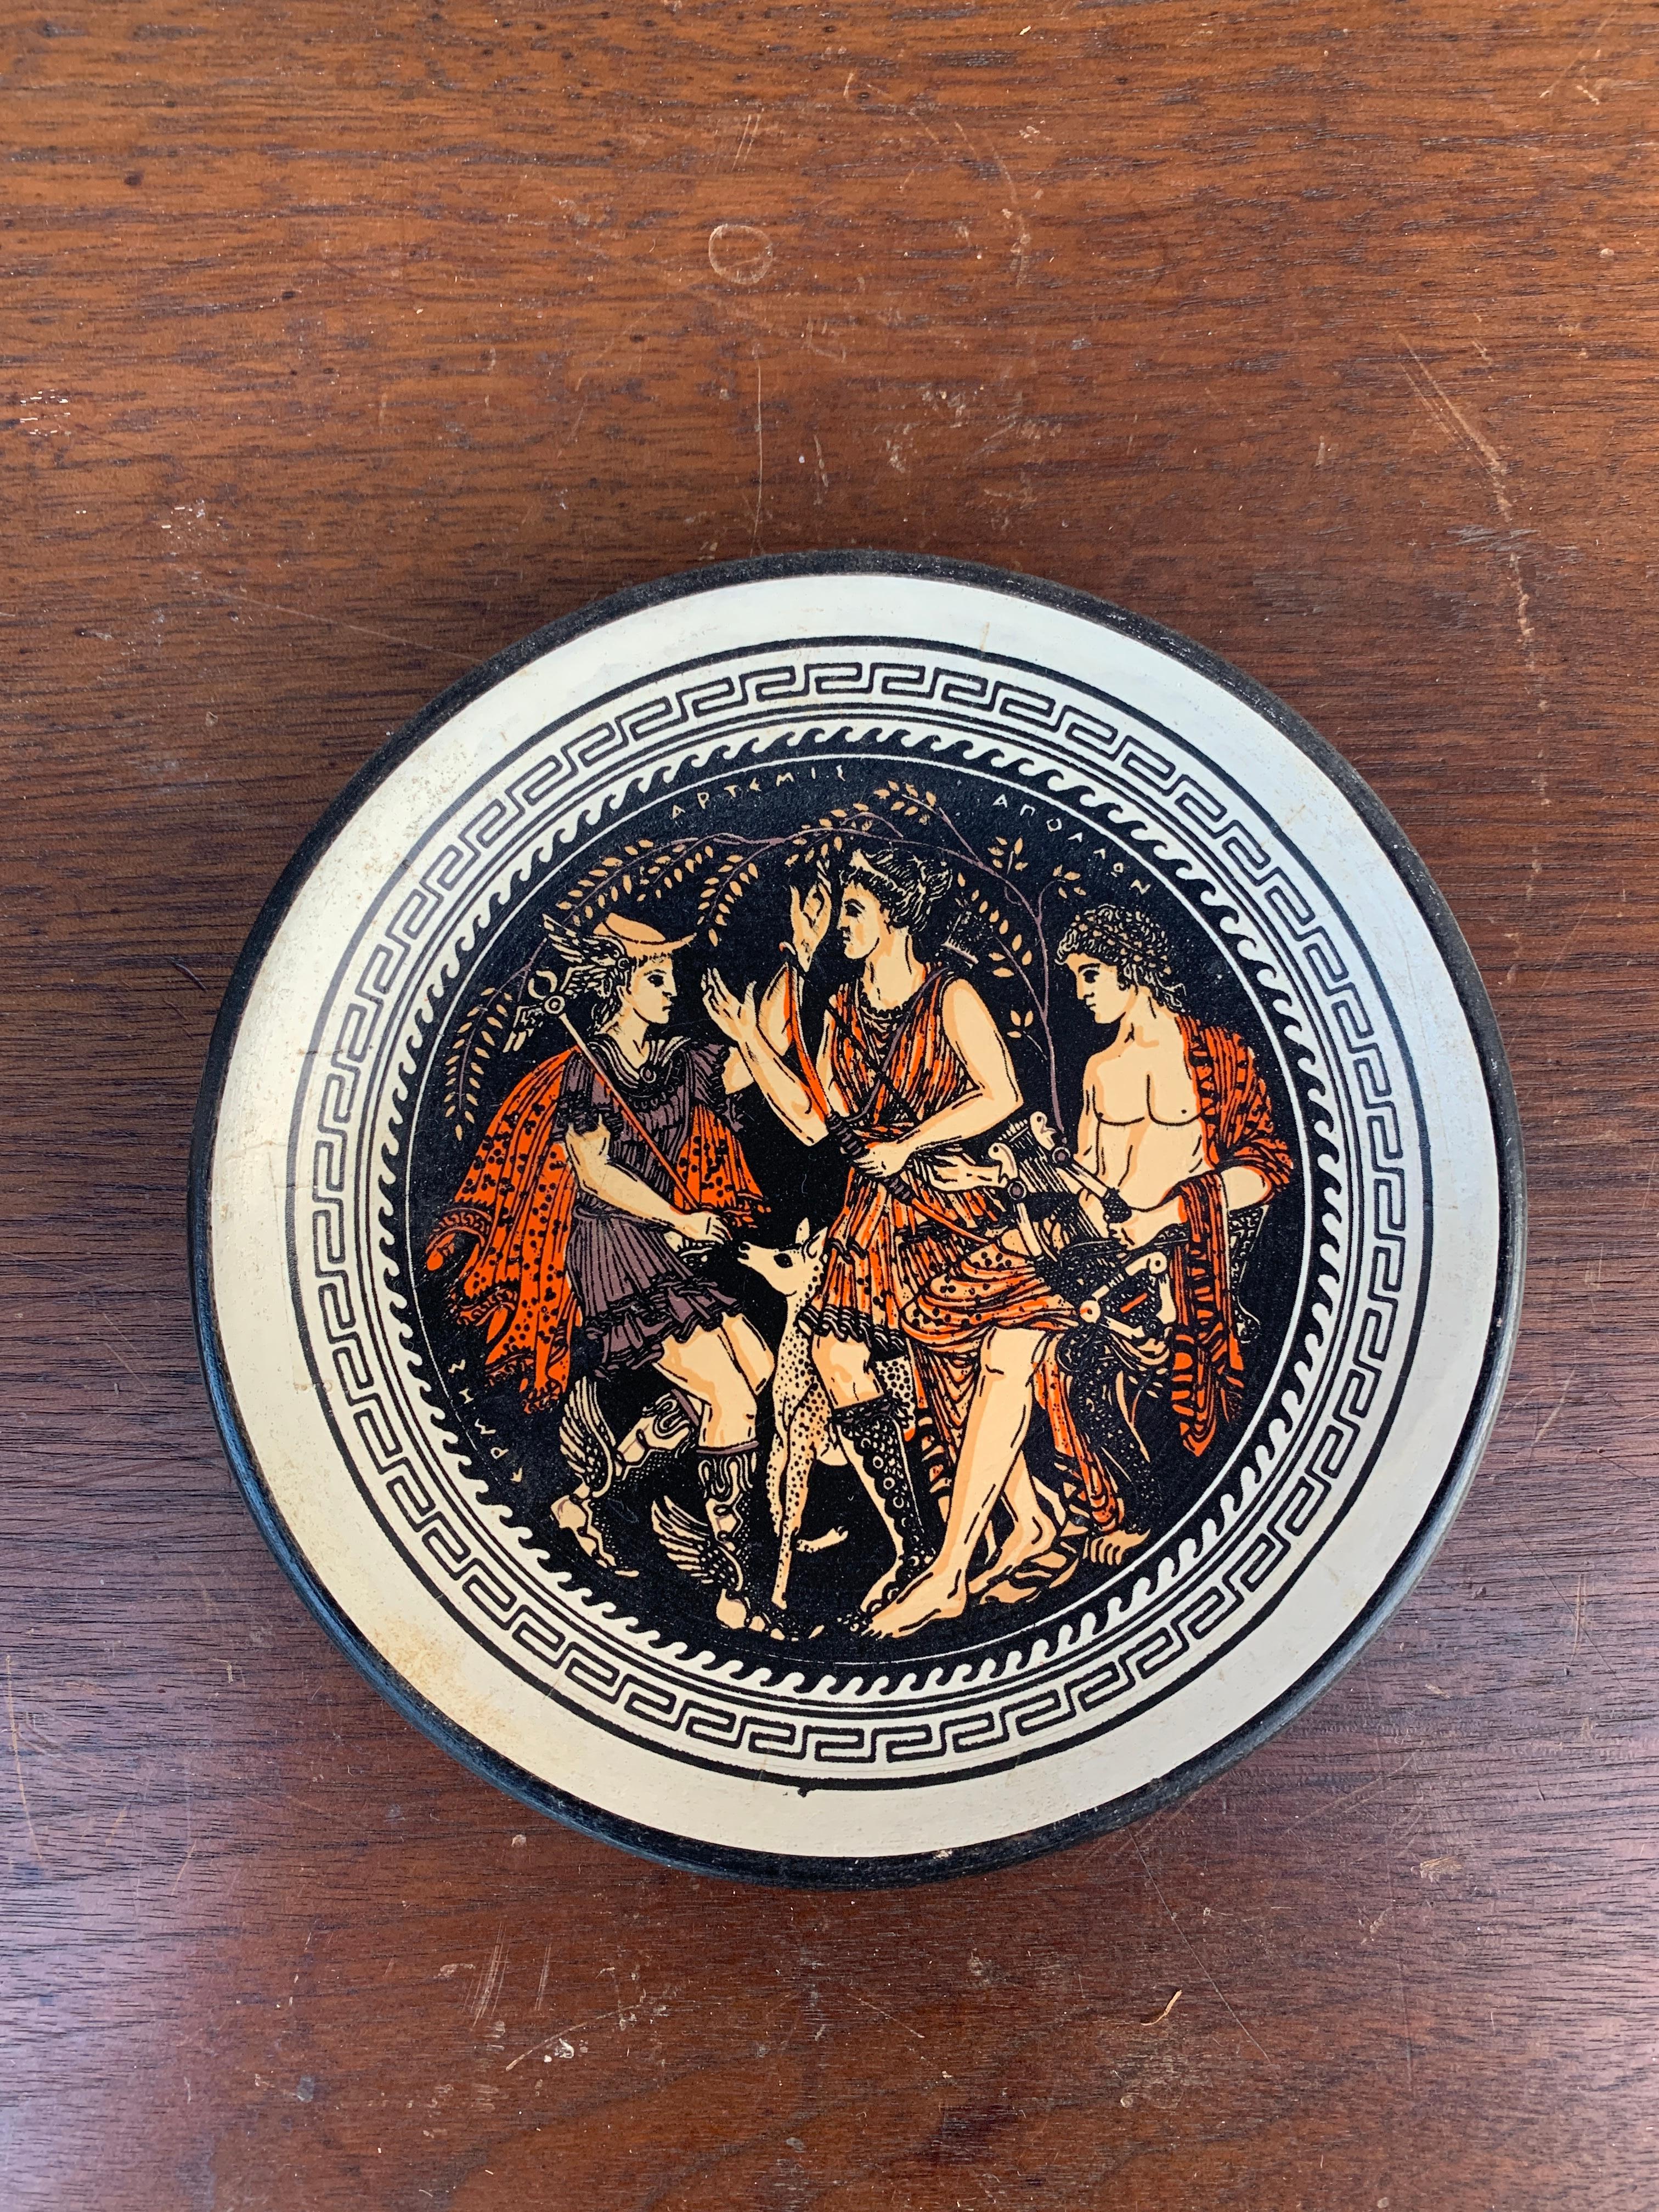 A beautiful vintage decorative Greek wall plate featuring mythological warriors and a Greek key border

Greece, Mid-20th Century

Hand painted terracotta

Very good original vintage condition.